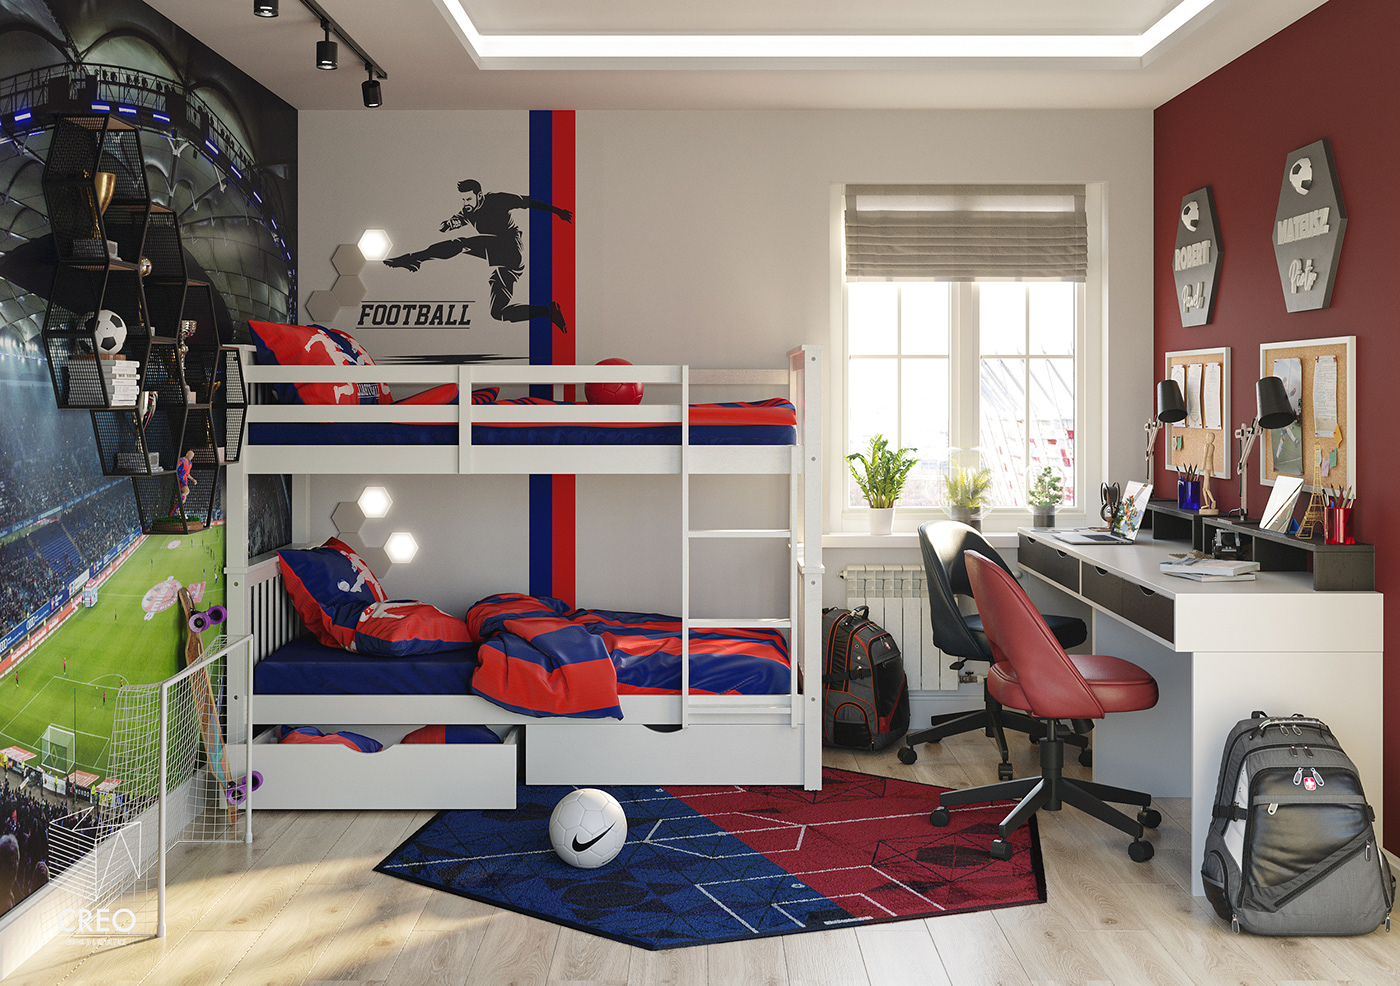 CREO 3D’s project of teenagers room with the use of our client’s bunk bed. Football fans should like